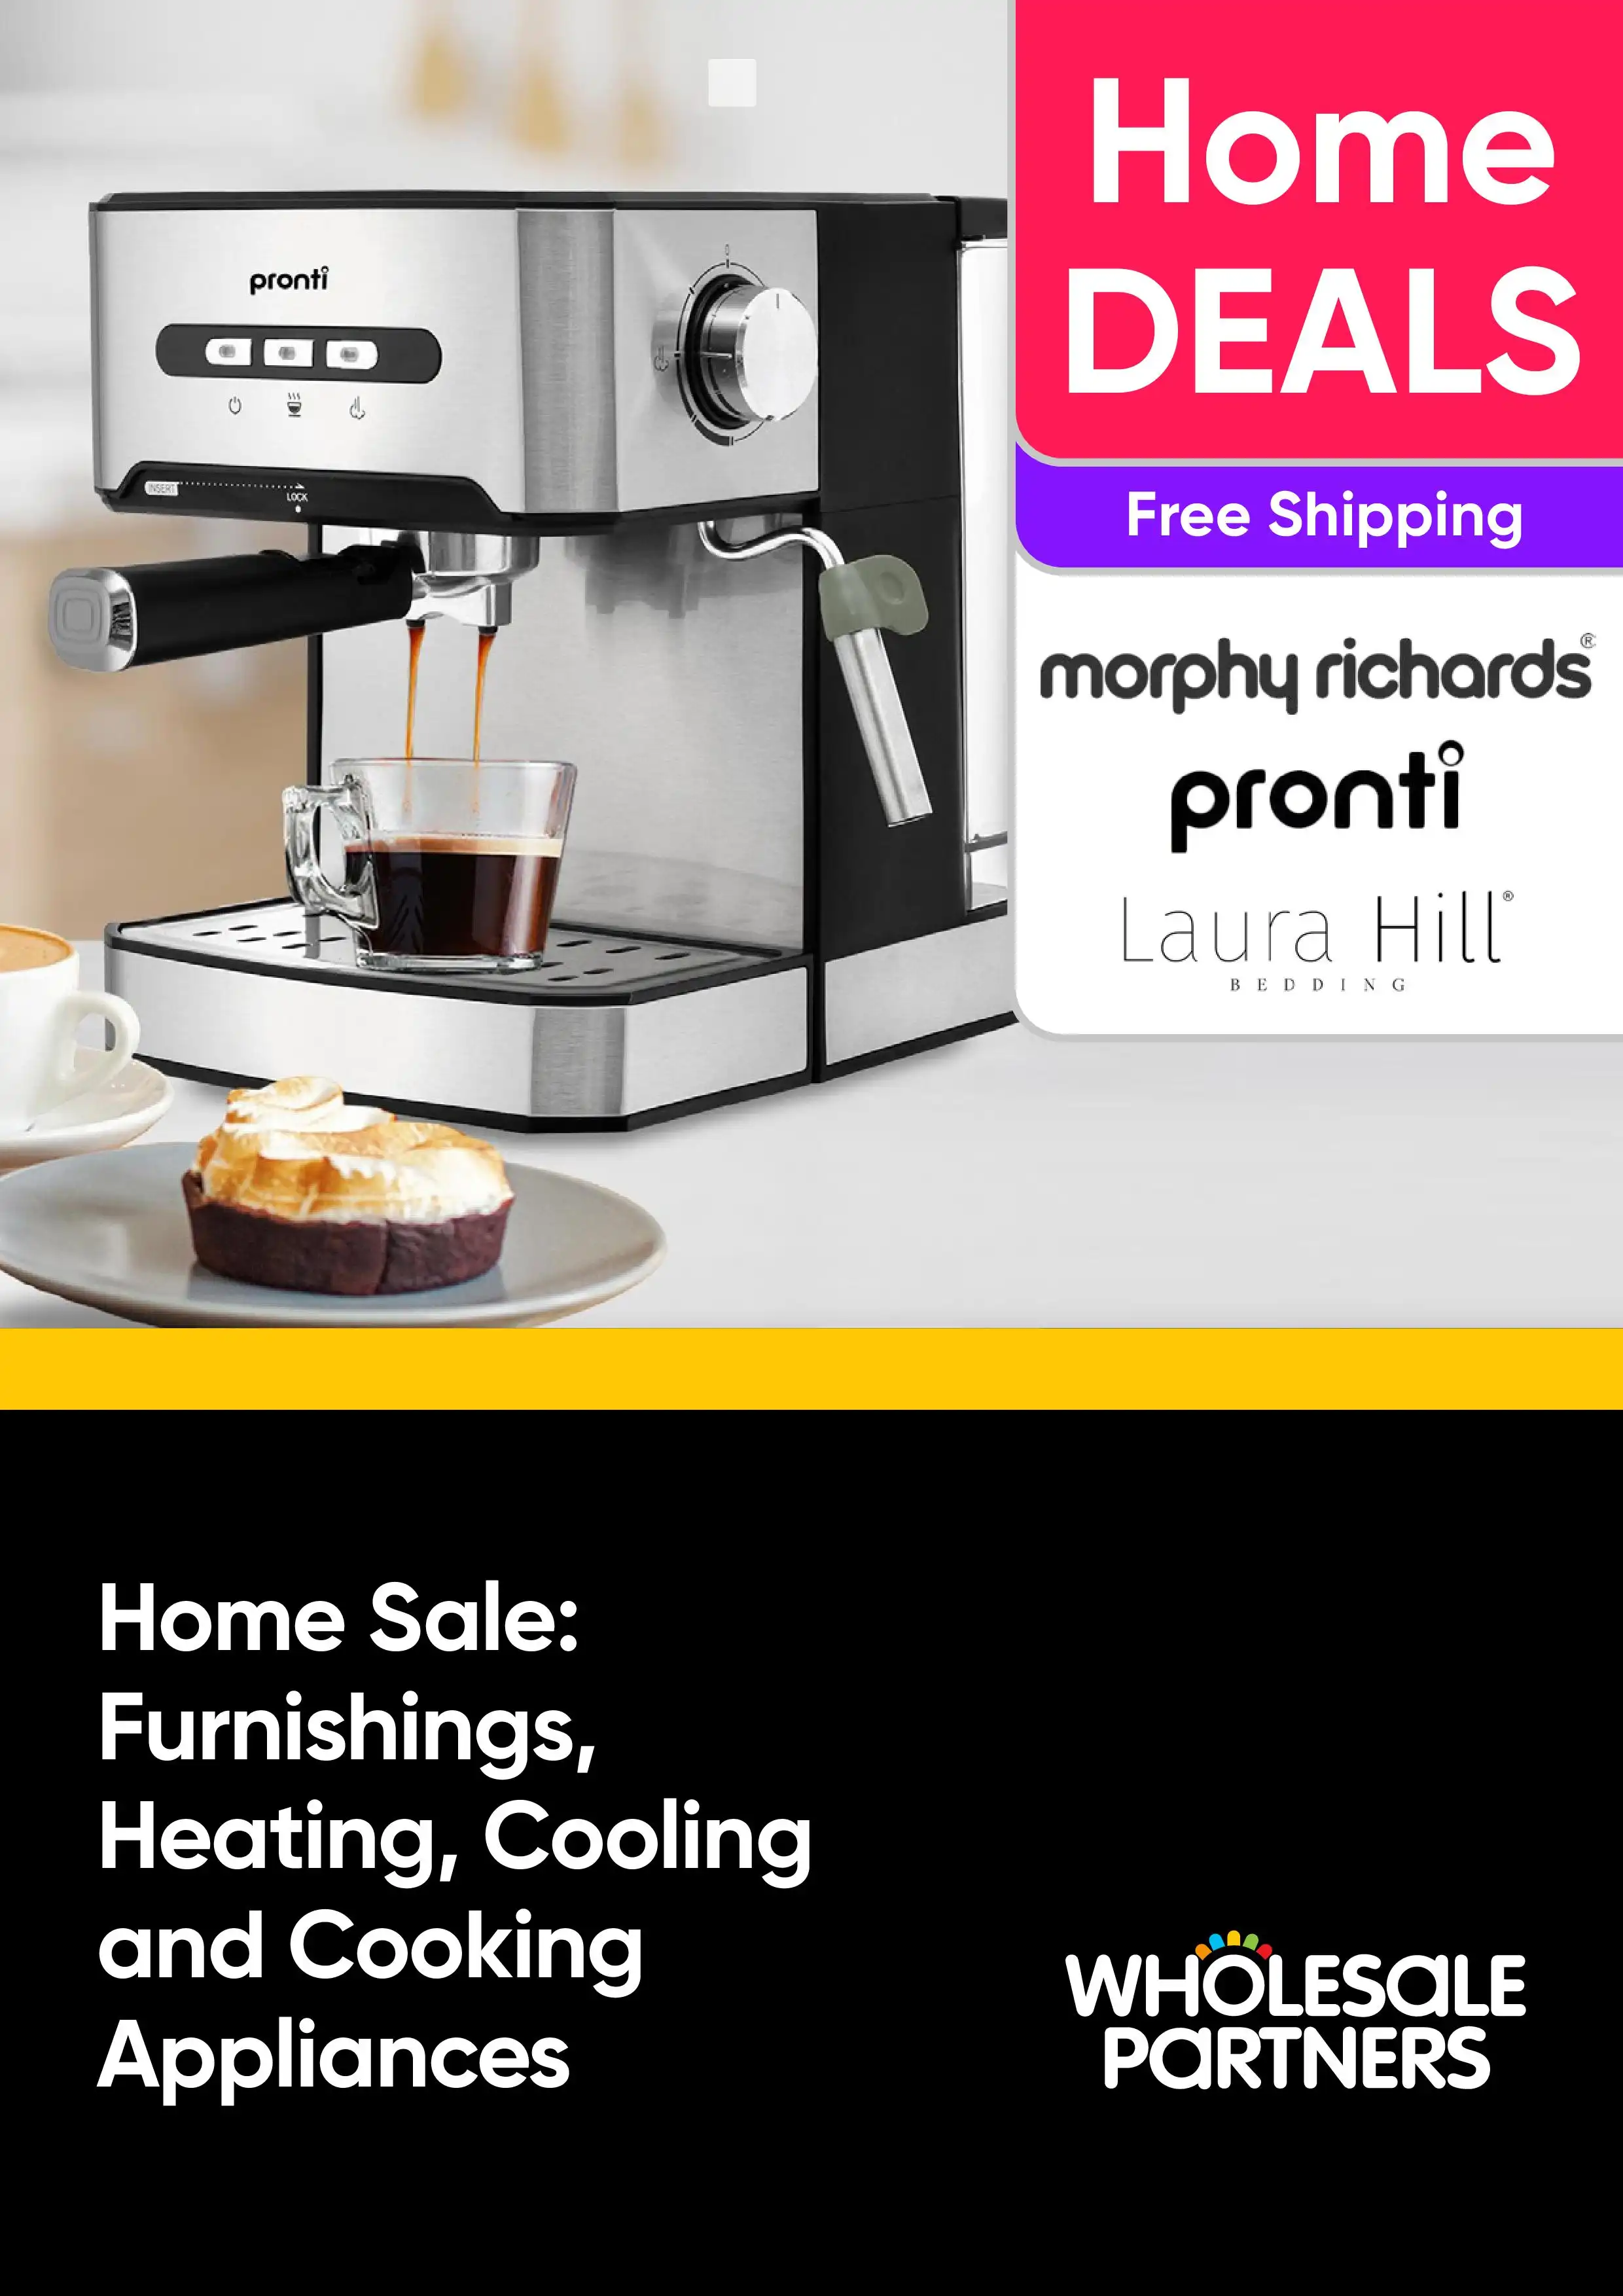 Home Sale - Furnishings, Heating, Cooling and Cooking Appliances - Morphy Richards, Pronti, Laura Hill - Free Shipping